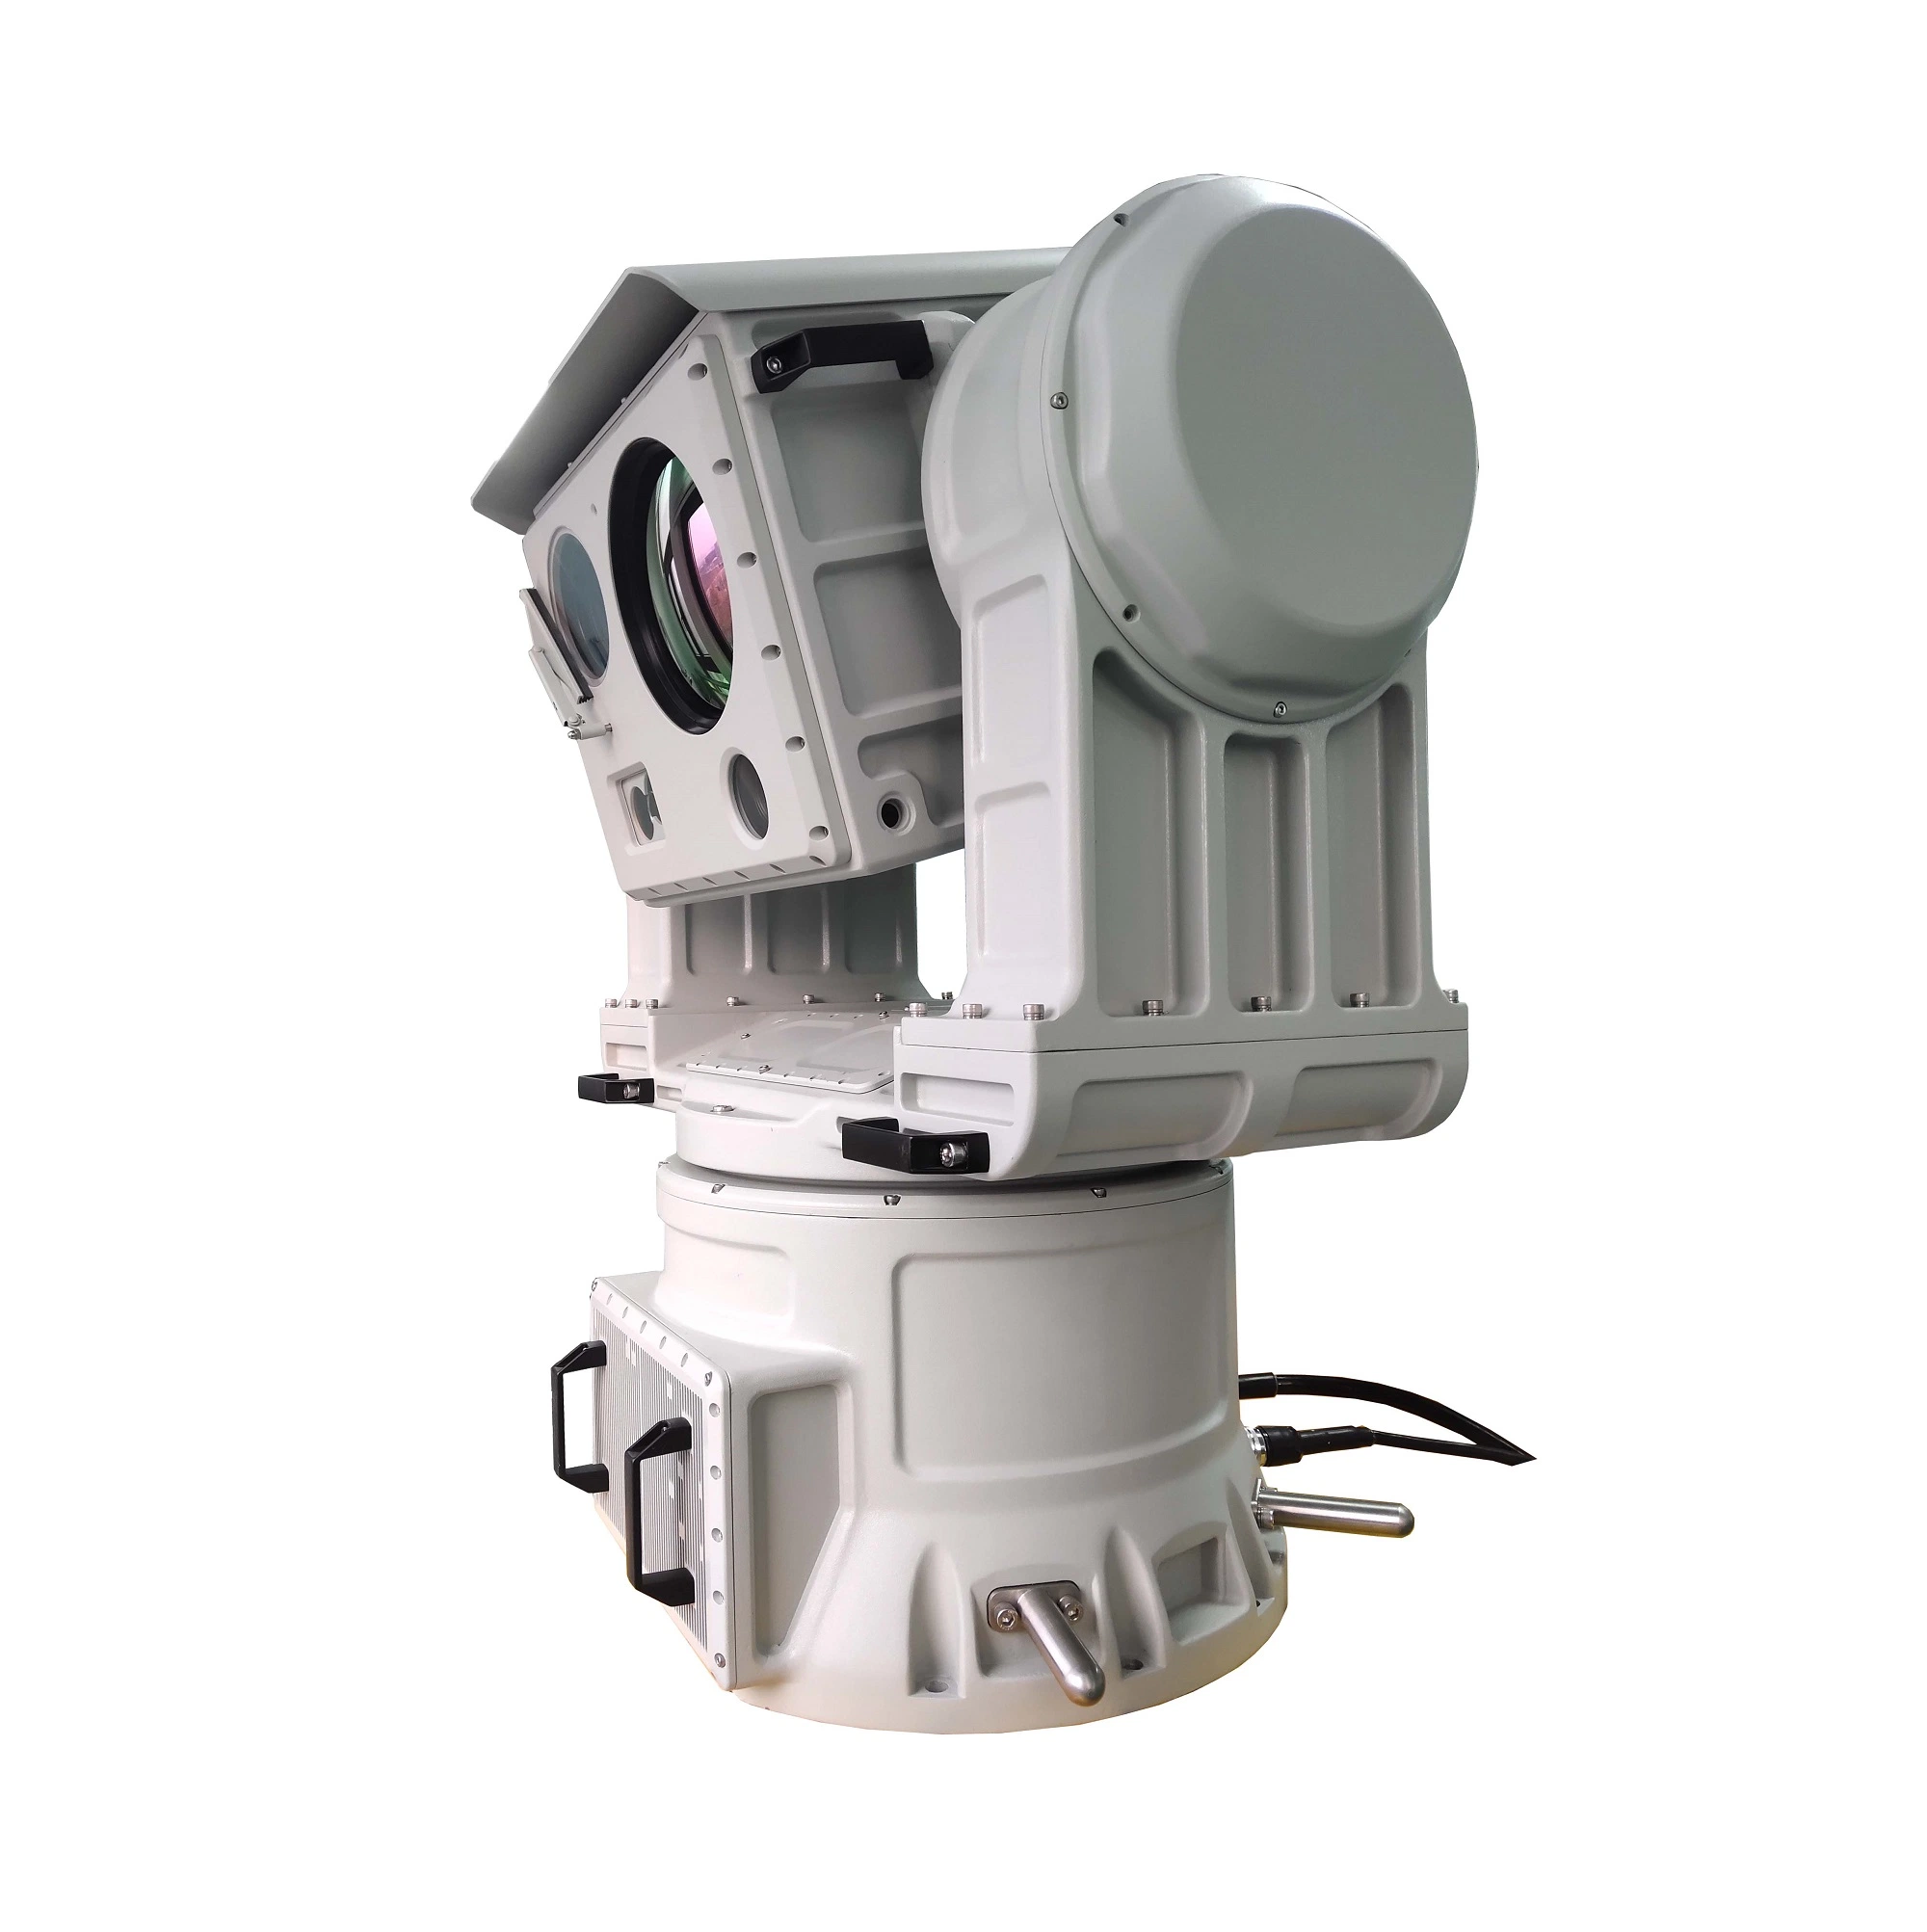 1280X1024 HD Cooled Thermal Imaging Heavy Duty High Performance U-Shaped Pantilt System